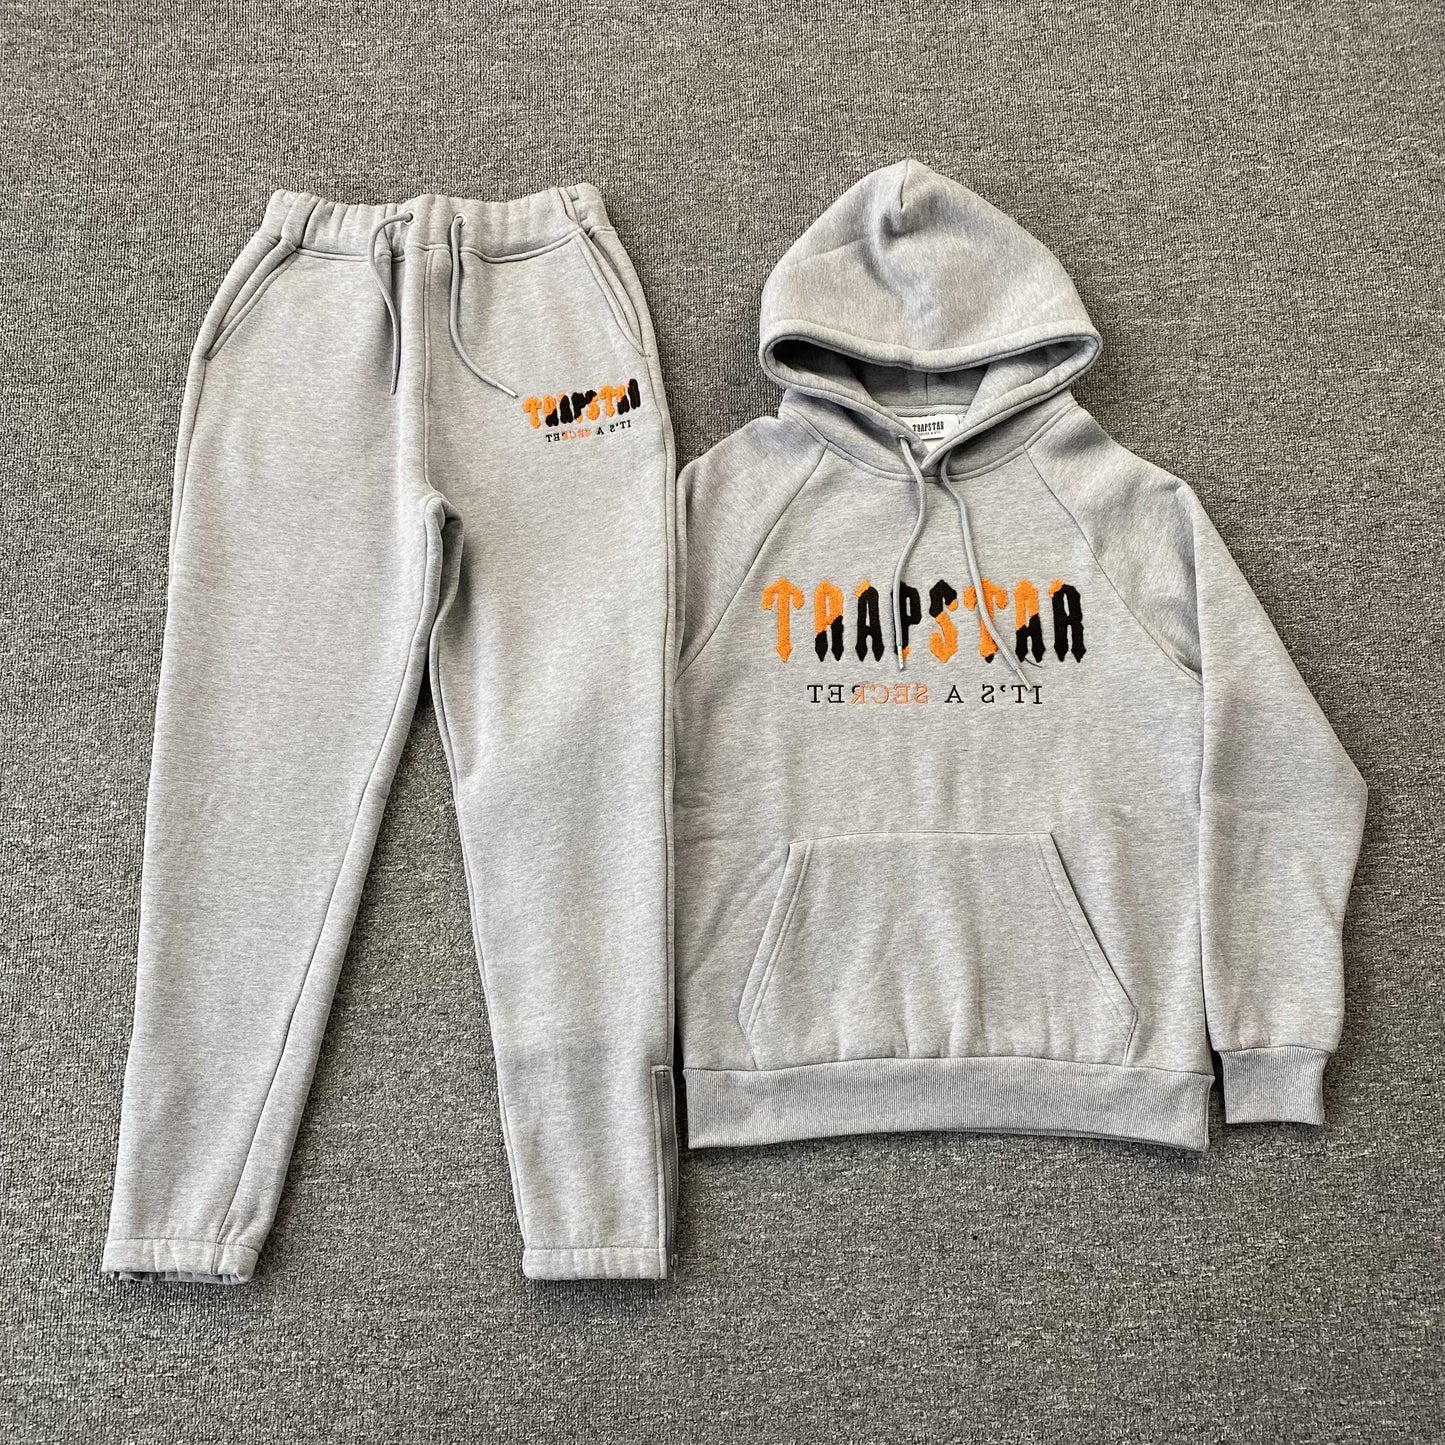 Trapstar Hoodie and Pants - 6